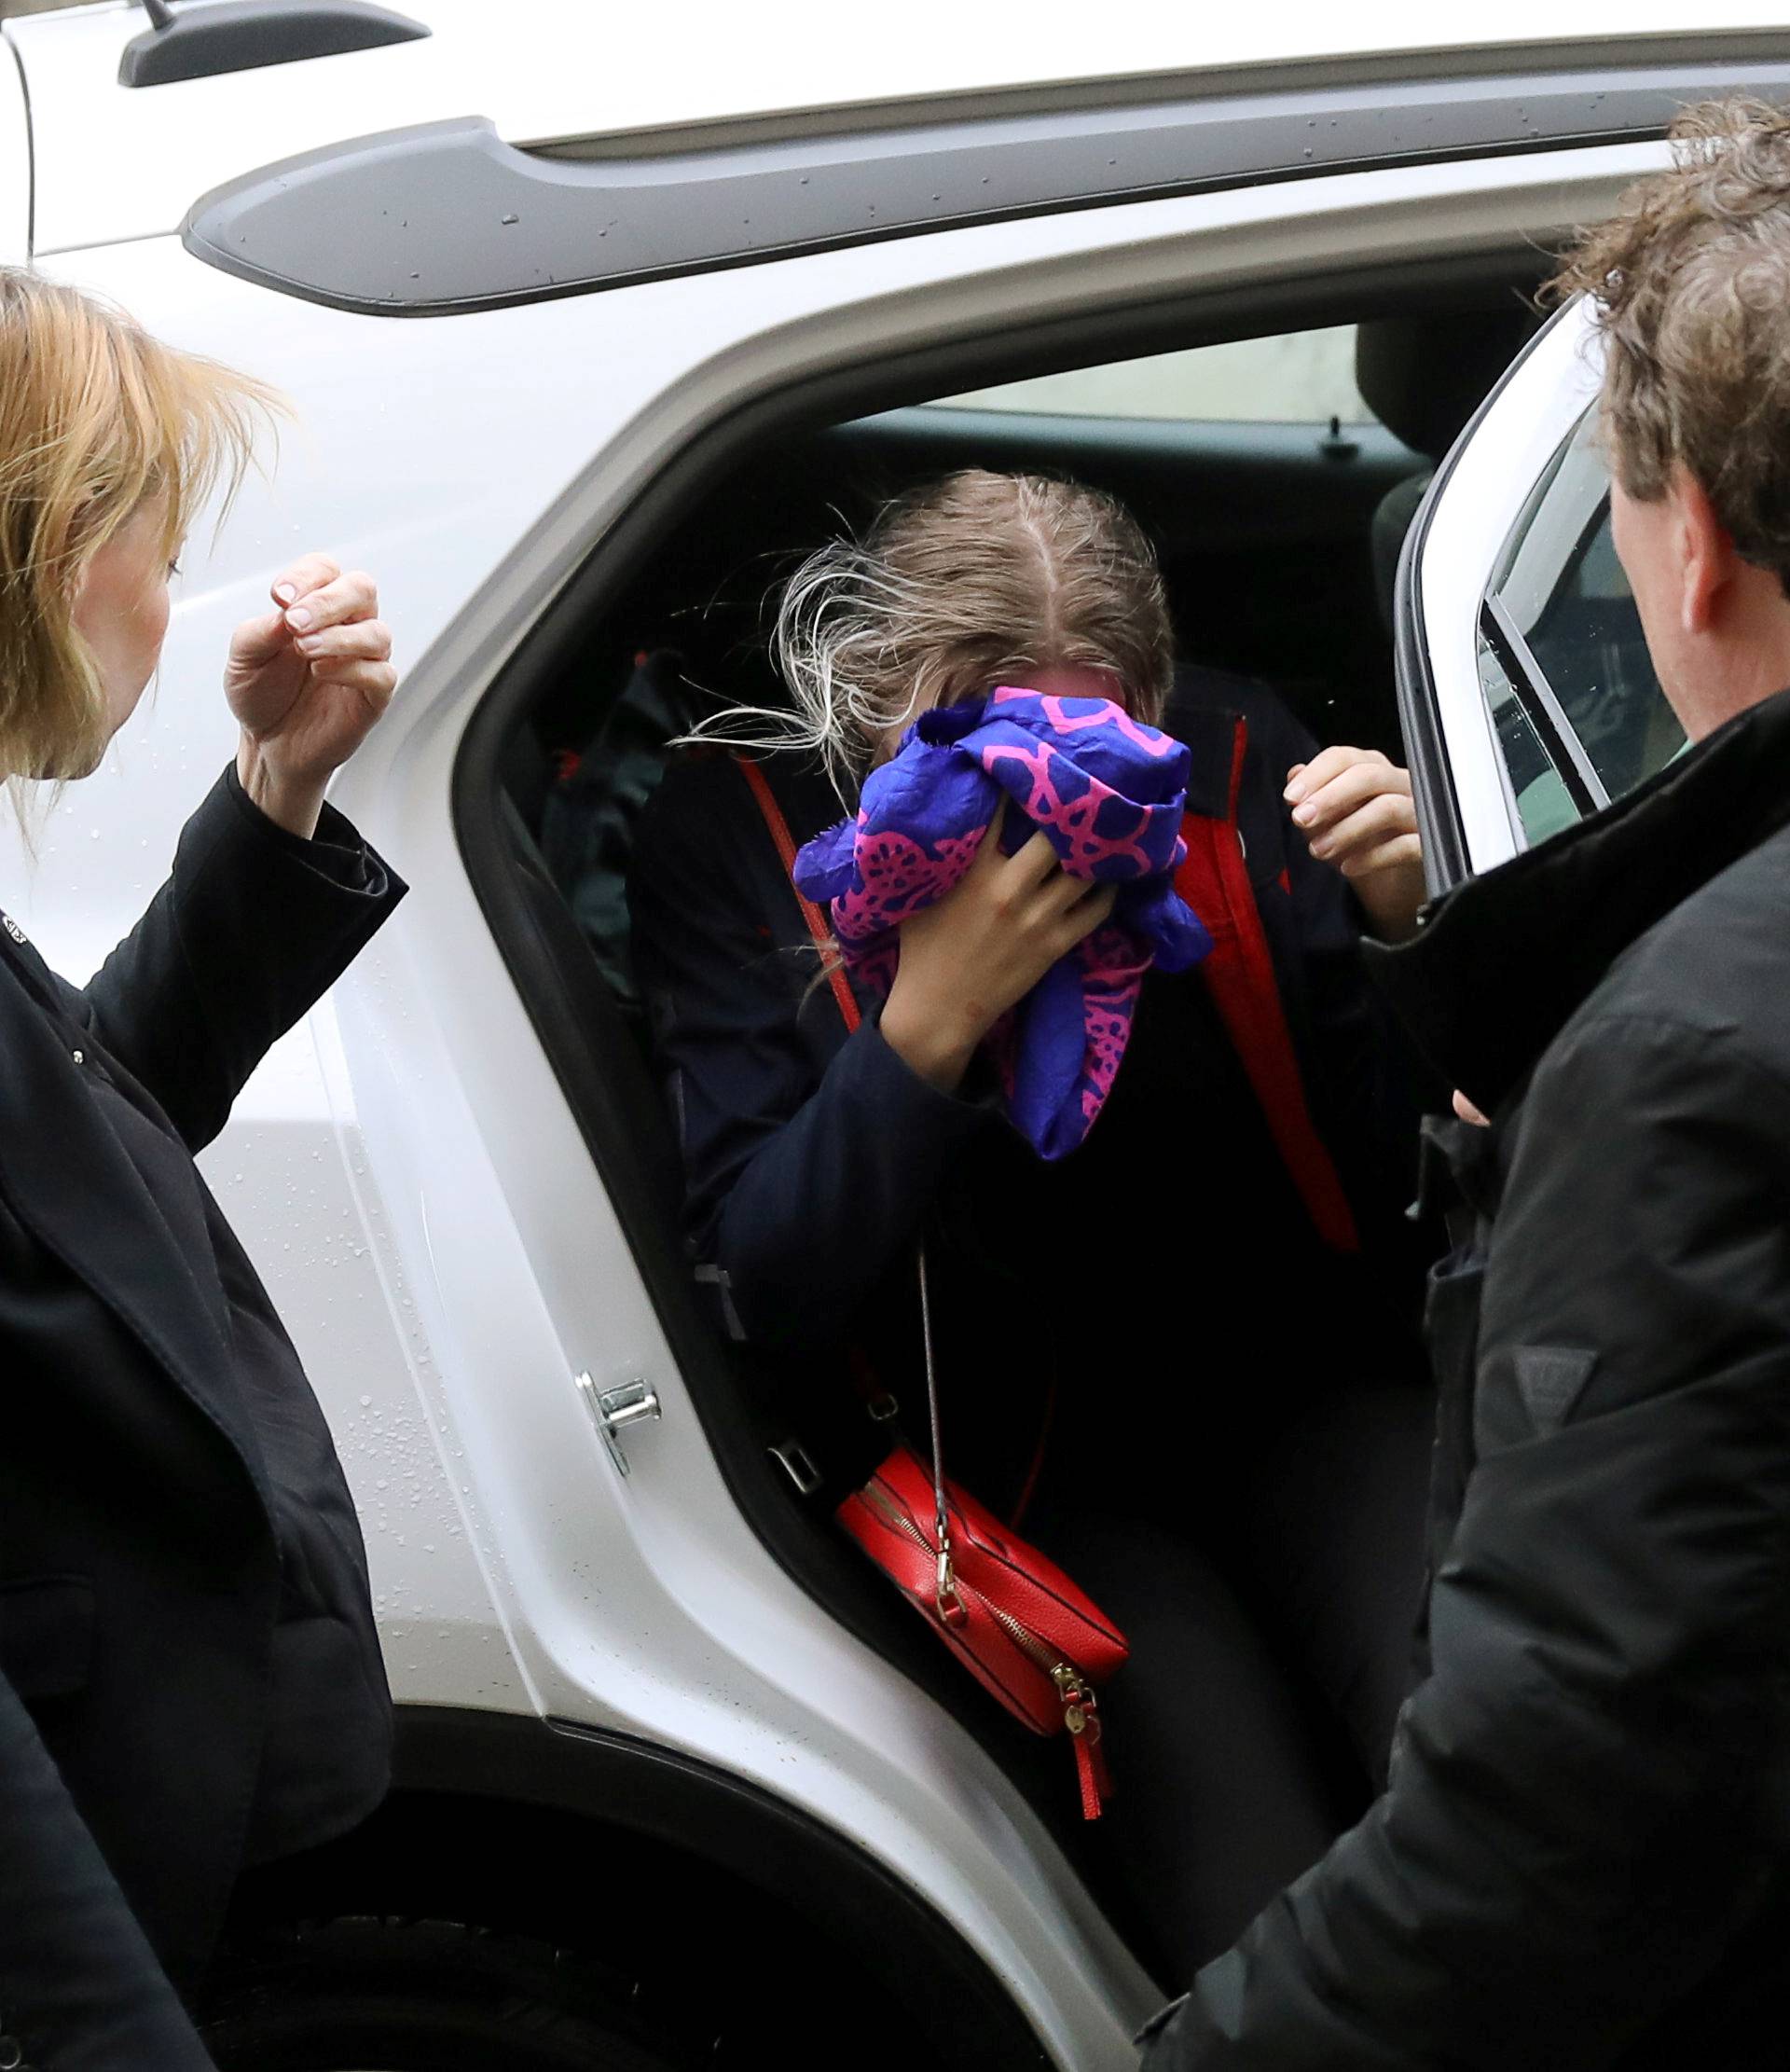 A British woman, accused of lying about being gang raped, covers her face as she arrives at the Famagusta courthouse in Paralimni